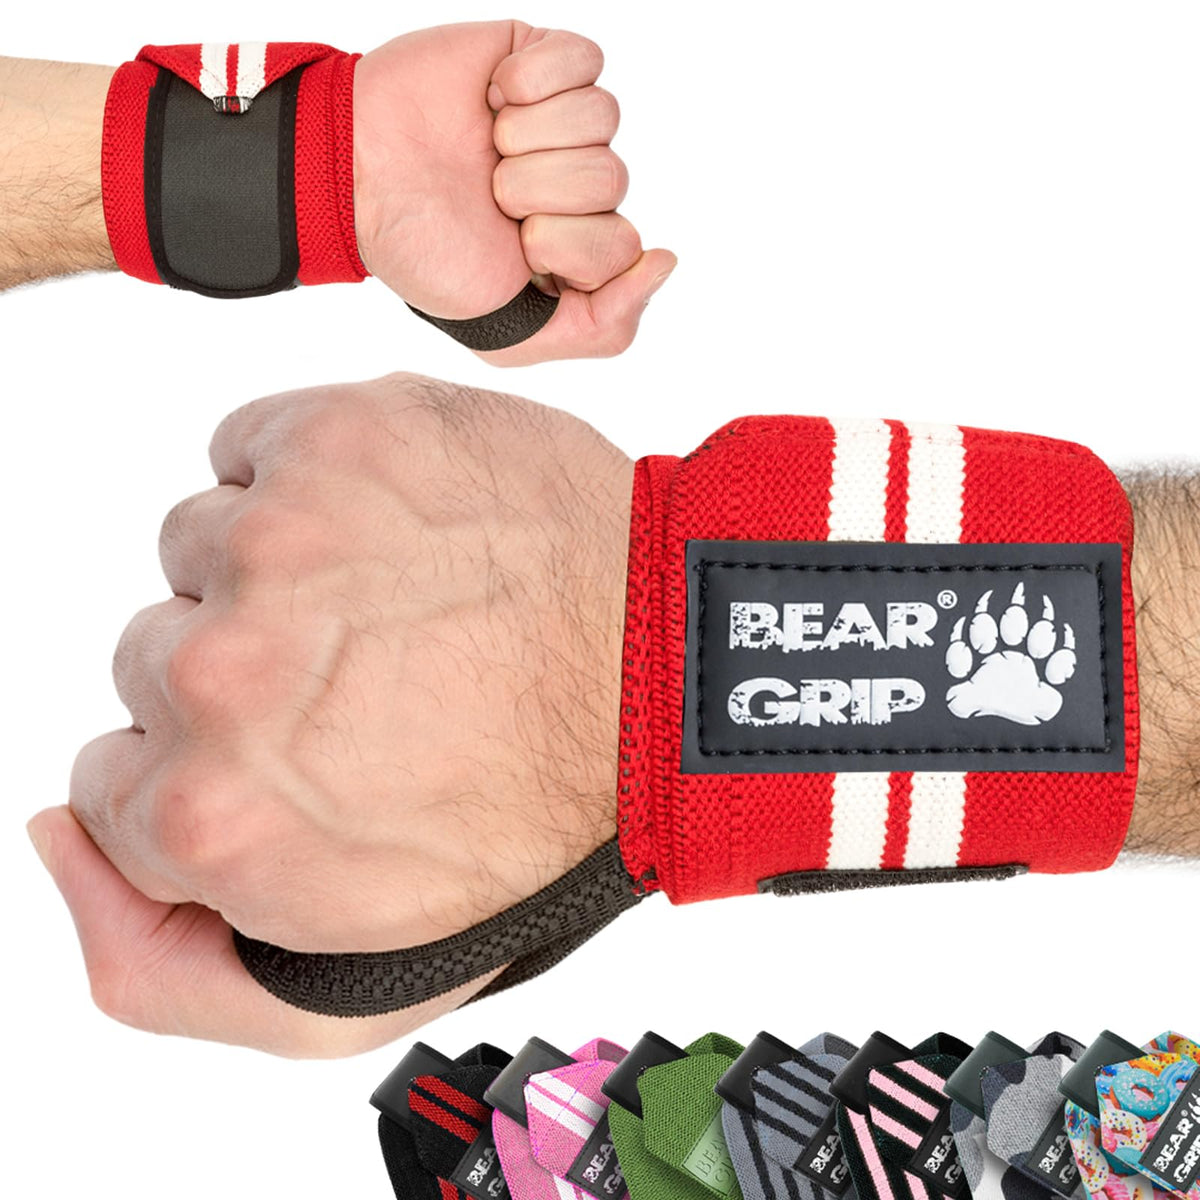 BEAR GRIP - Premium weight lifting wrist support wraps, (Sold in pairs) (Red/white)